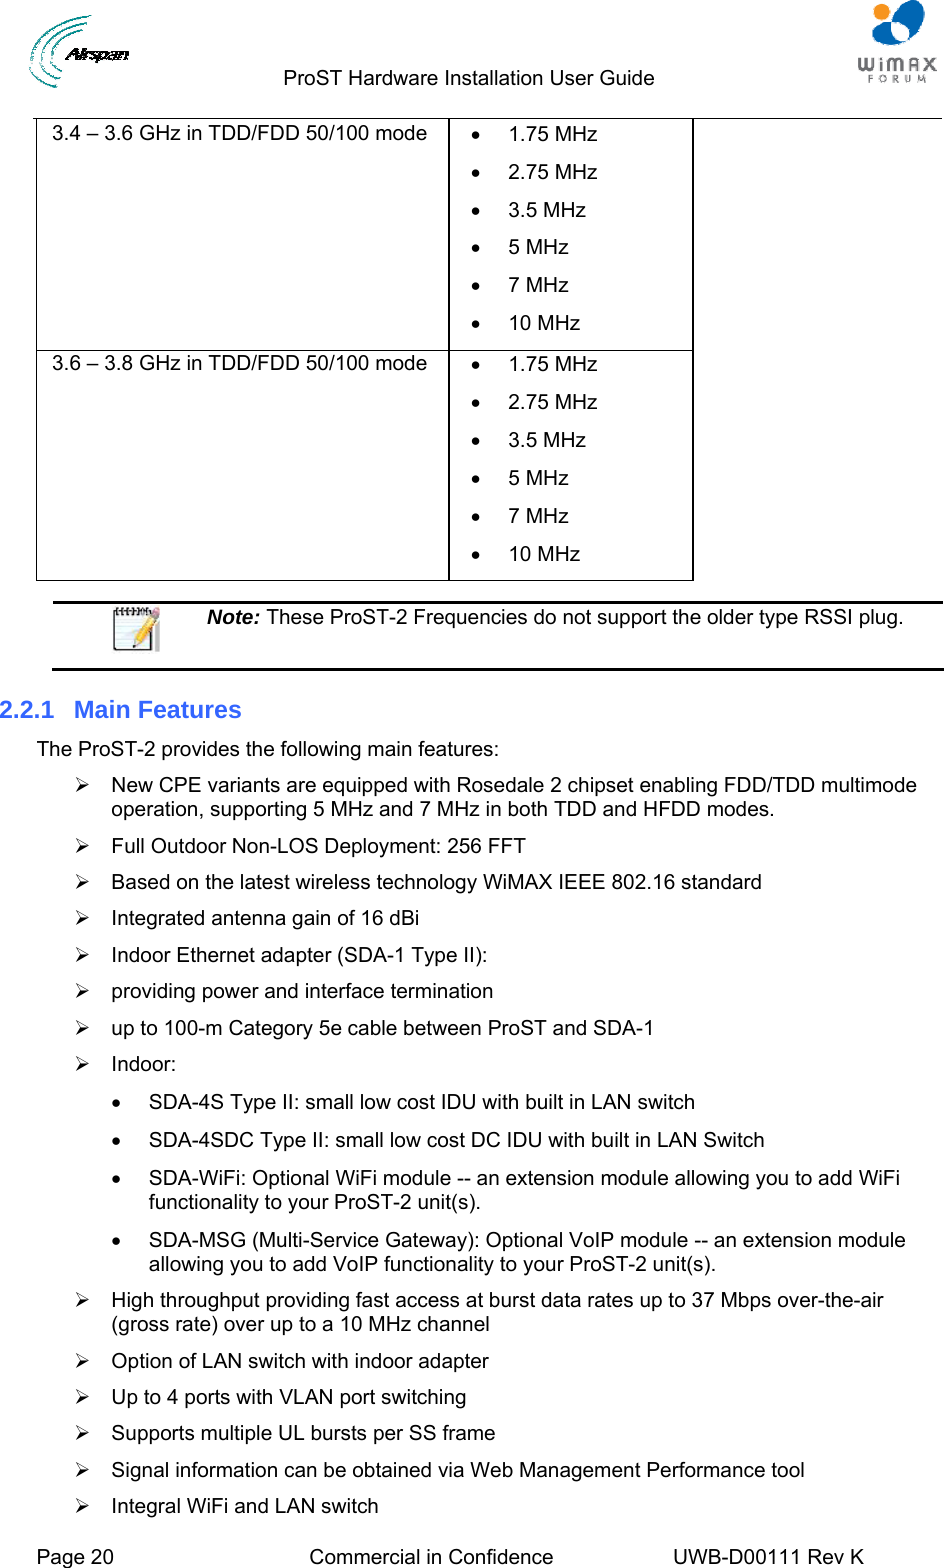                                  ProST Hardware Installation User Guide     Page 20  Commercial in Confidence  UWB-D00111 Rev K   3.4 – 3.6 GHz in TDD/FDD 50/100 mode  • 1.75 MHz • 2.75 MHz • 3.5 MHz • 5 MHz • 7 MHz • 10 MHz 3.6 – 3.8 GHz in TDD/FDD 50/100 mode  • 1.75 MHz • 2.75 MHz • 3.5 MHz • 5 MHz • 7 MHz • 10 MHz   Note: These ProST-2 Frequencies do not support the older type RSSI plug.  2.2.1 Main Features The ProST-2 provides the following main features: ¾  New CPE variants are equipped with Rosedale 2 chipset enabling FDD/TDD multimode operation, supporting 5 MHz and 7 MHz in both TDD and HFDD modes. ¾  Full Outdoor Non-LOS Deployment: 256 FFT ¾  Based on the latest wireless technology WiMAX IEEE 802.16 standard ¾  Integrated antenna gain of 16 dBi ¾  Indoor Ethernet adapter (SDA-1 Type II): ¾  providing power and interface termination ¾  up to 100-m Category 5e cable between ProST and SDA-1 ¾ Indoor: •  SDA-4S Type II: small low cost IDU with built in LAN switch •  SDA-4SDC Type II: small low cost DC IDU with built in LAN Switch •  SDA-WiFi: Optional WiFi module -- an extension module allowing you to add WiFi functionality to your ProST-2 unit(s). •  SDA-MSG (Multi-Service Gateway): Optional VoIP module -- an extension module allowing you to add VoIP functionality to your ProST-2 unit(s). ¾  High throughput providing fast access at burst data rates up to 37 Mbps over-the-air (gross rate) over up to a 10 MHz channel ¾  Option of LAN switch with indoor adapter ¾  Up to 4 ports with VLAN port switching ¾  Supports multiple UL bursts per SS frame ¾  Signal information can be obtained via Web Management Performance tool ¾  Integral WiFi and LAN switch 